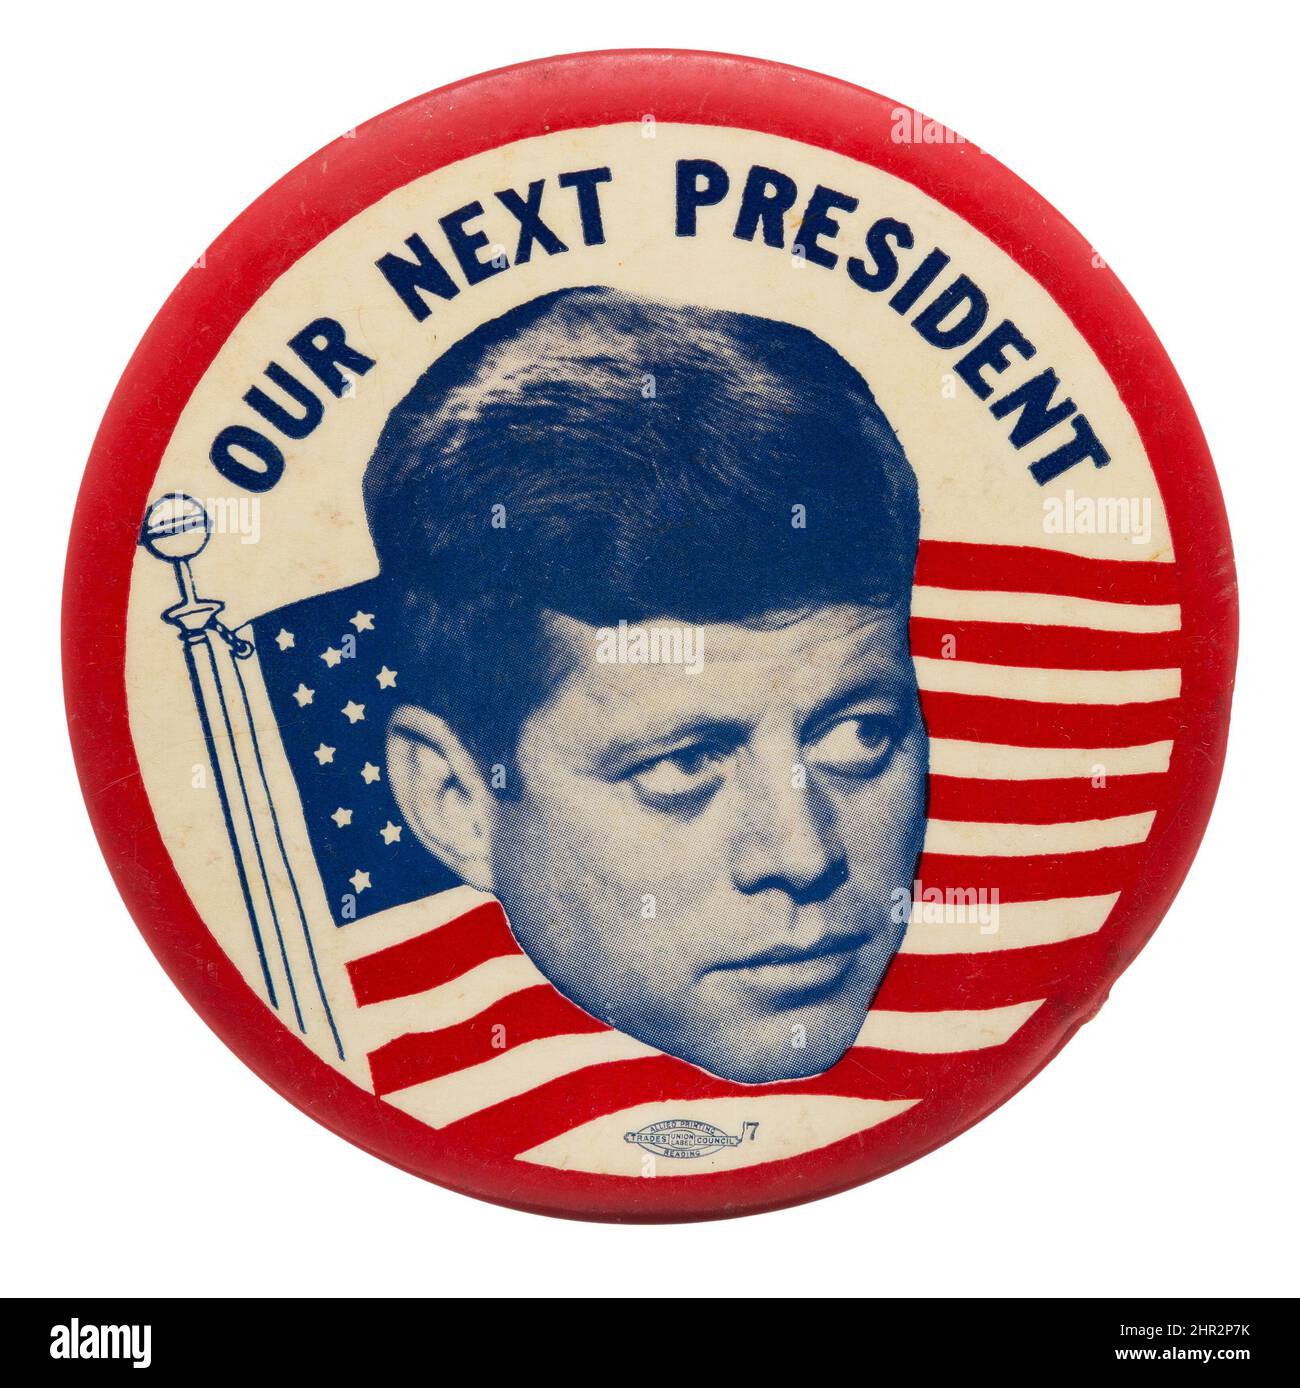 Election button feat. John F. Kenned.  Large 'Floating Head' Picture Pin. 4 inch button with portrait of JFK. 'Our Next President'. Stock Photo